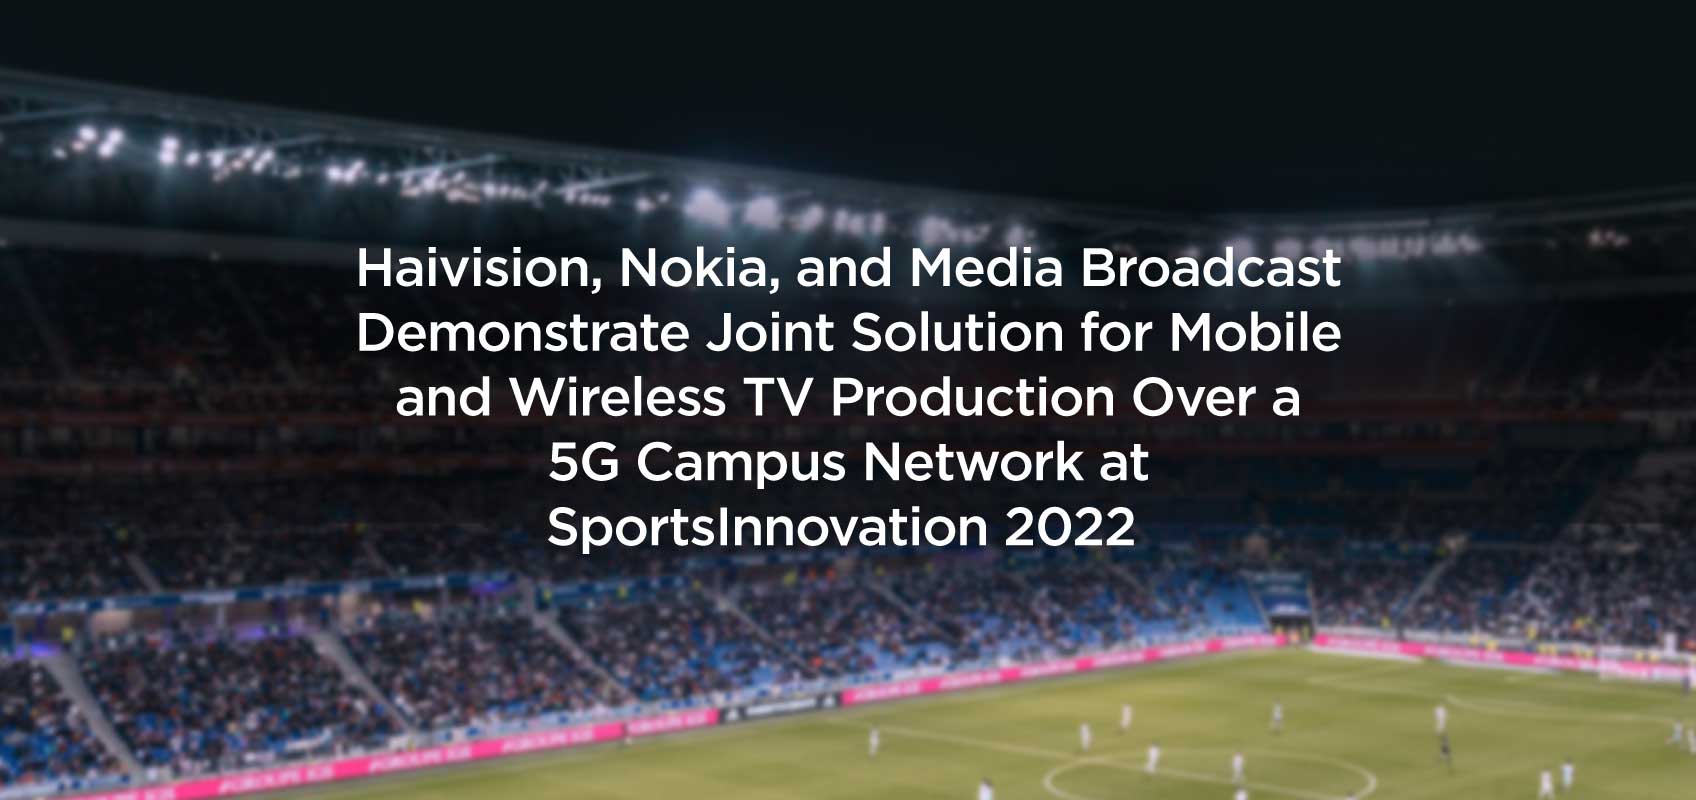 Stadium Cover Page Title - Haivision, Nokia, and Media Broadcast Demonstrate Joint Solution for Mobile and Wireless TV Production Over a 5G Campus Network at SportsInnovation 2022